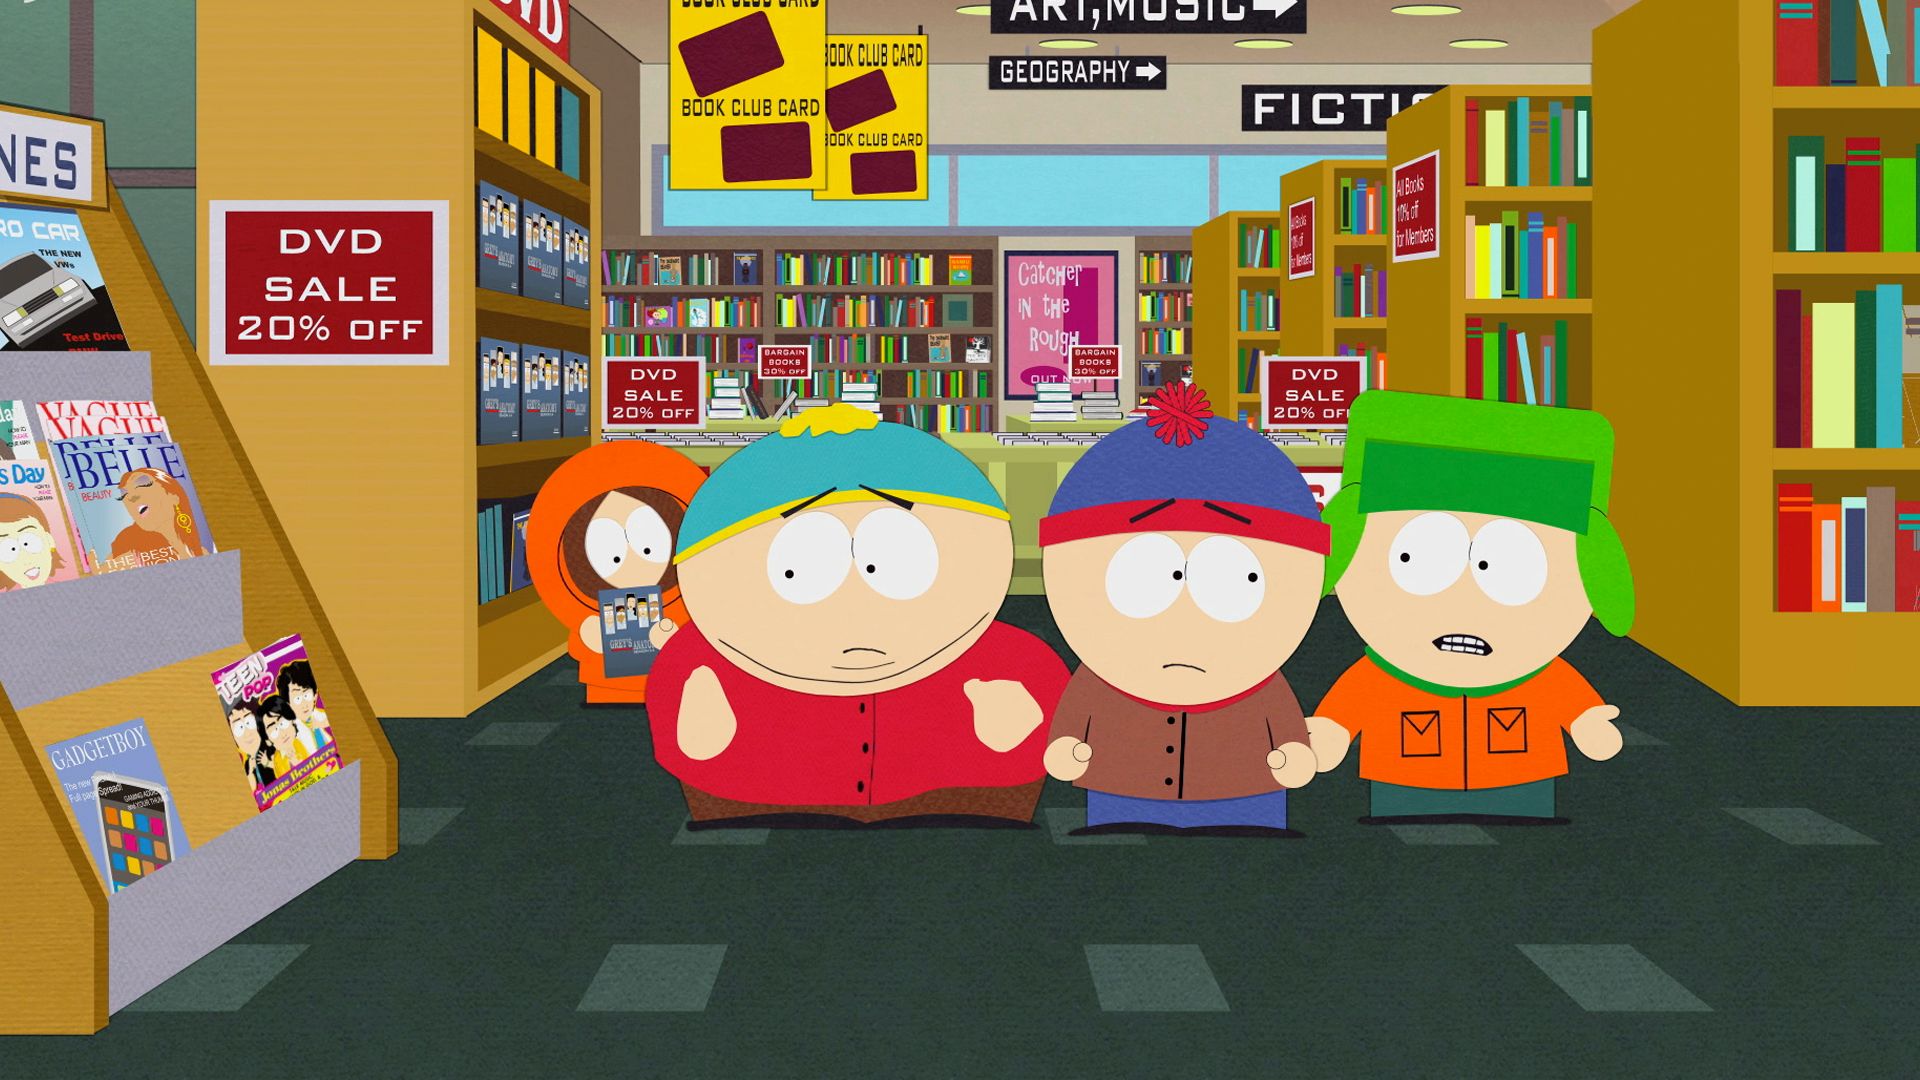 Hold Tight Buddy - Season 13 Episode 1 - South Park